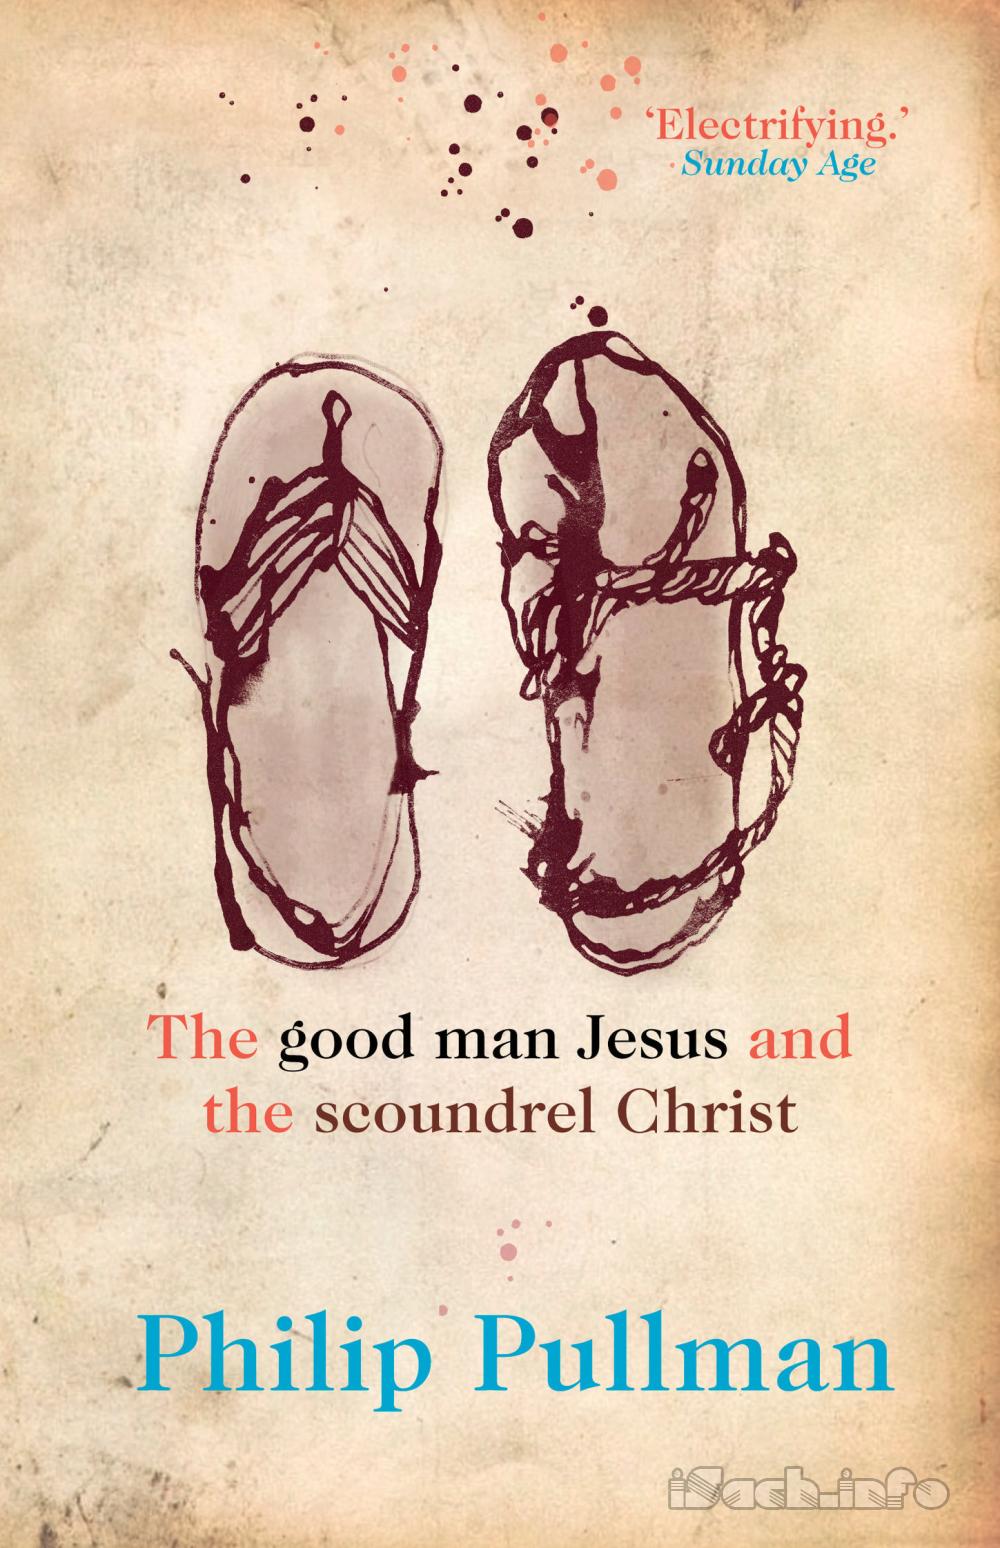 The Good Man Jesus And The Scoundrel Christ